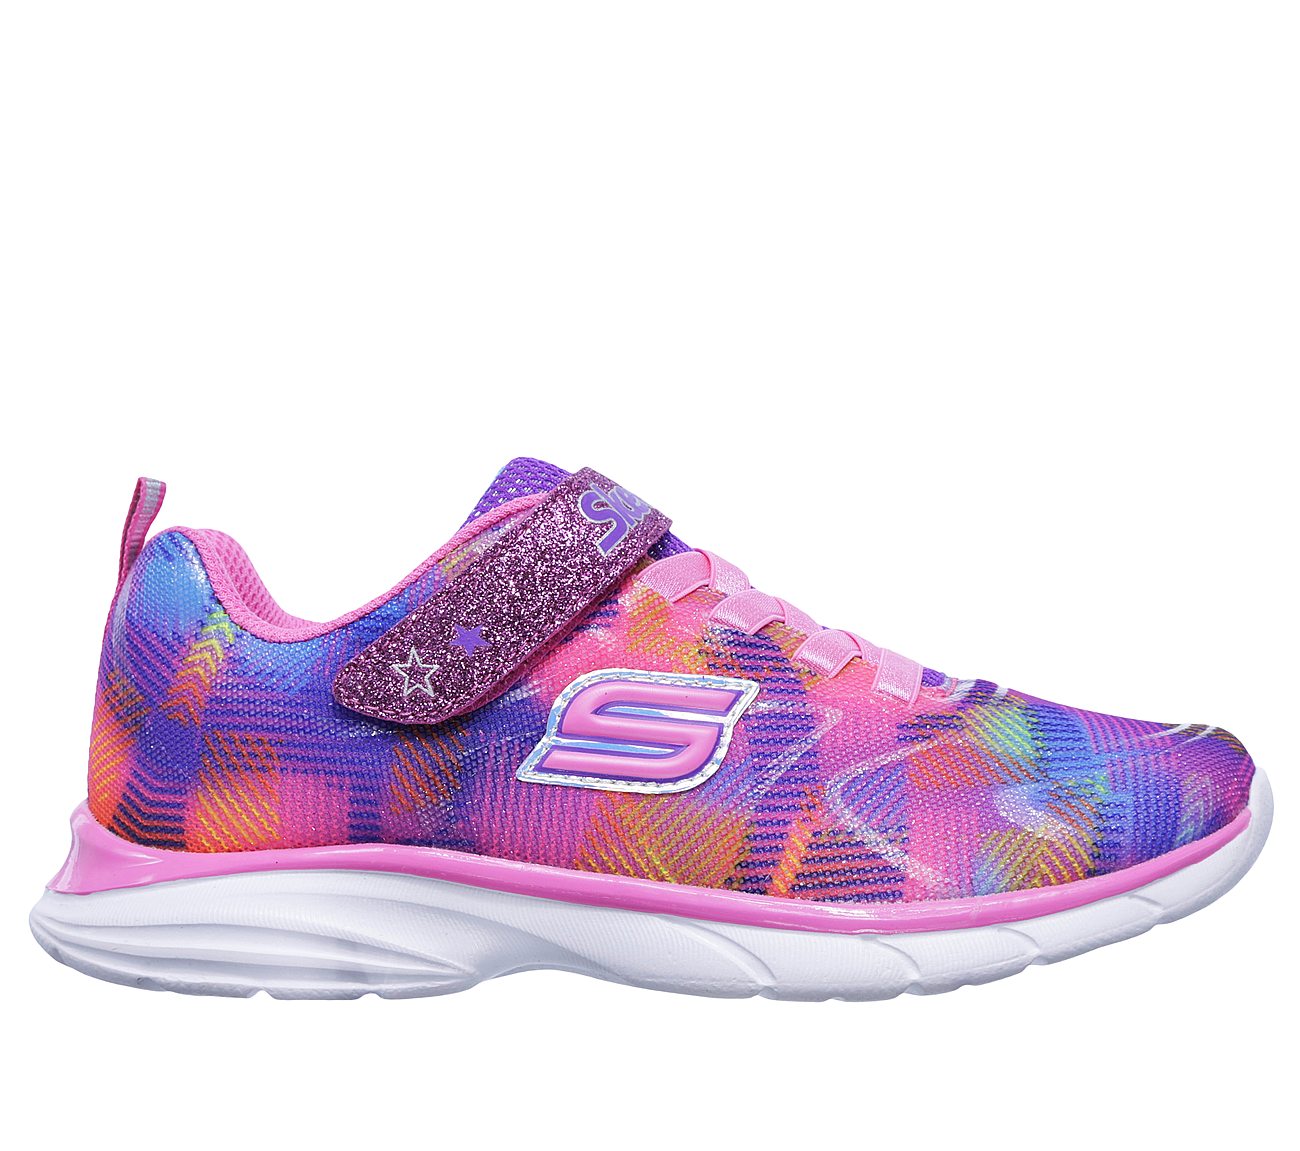 skechers multi colored shoes